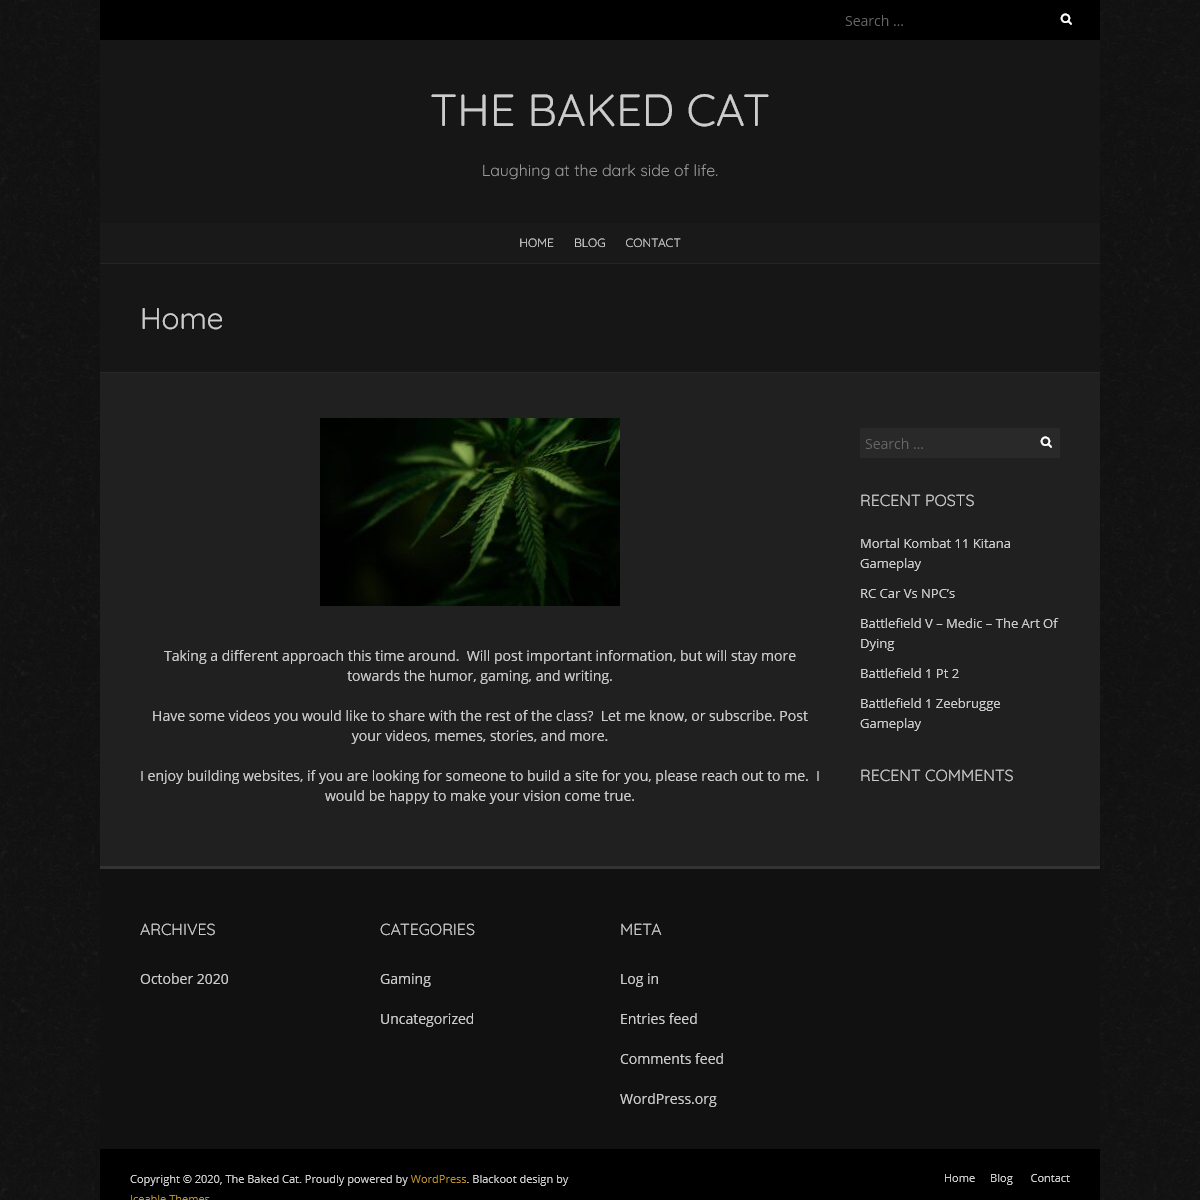 A complete backup of bakedcat.org